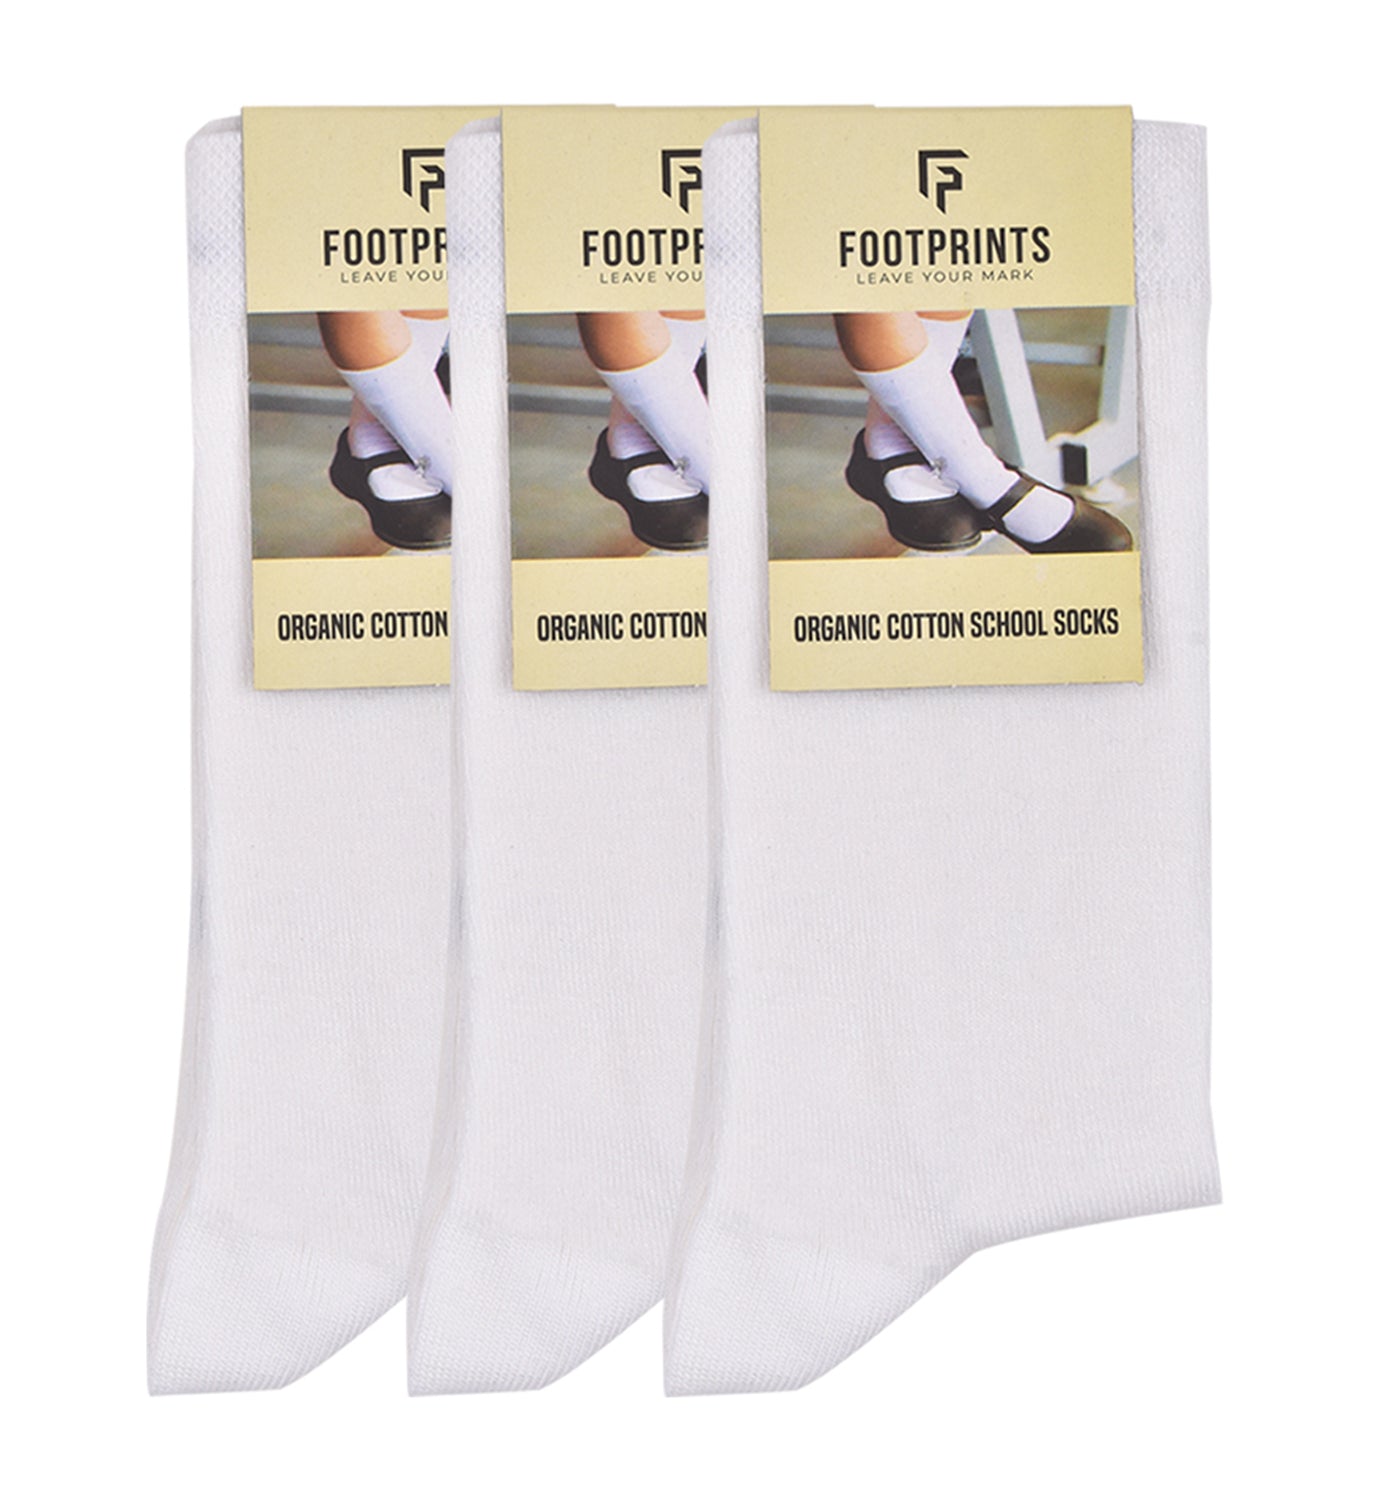 Kids Organic Cotton School Socks - Unisex - Calf length- Pack of 3 (White)- Extra soft and Breathable